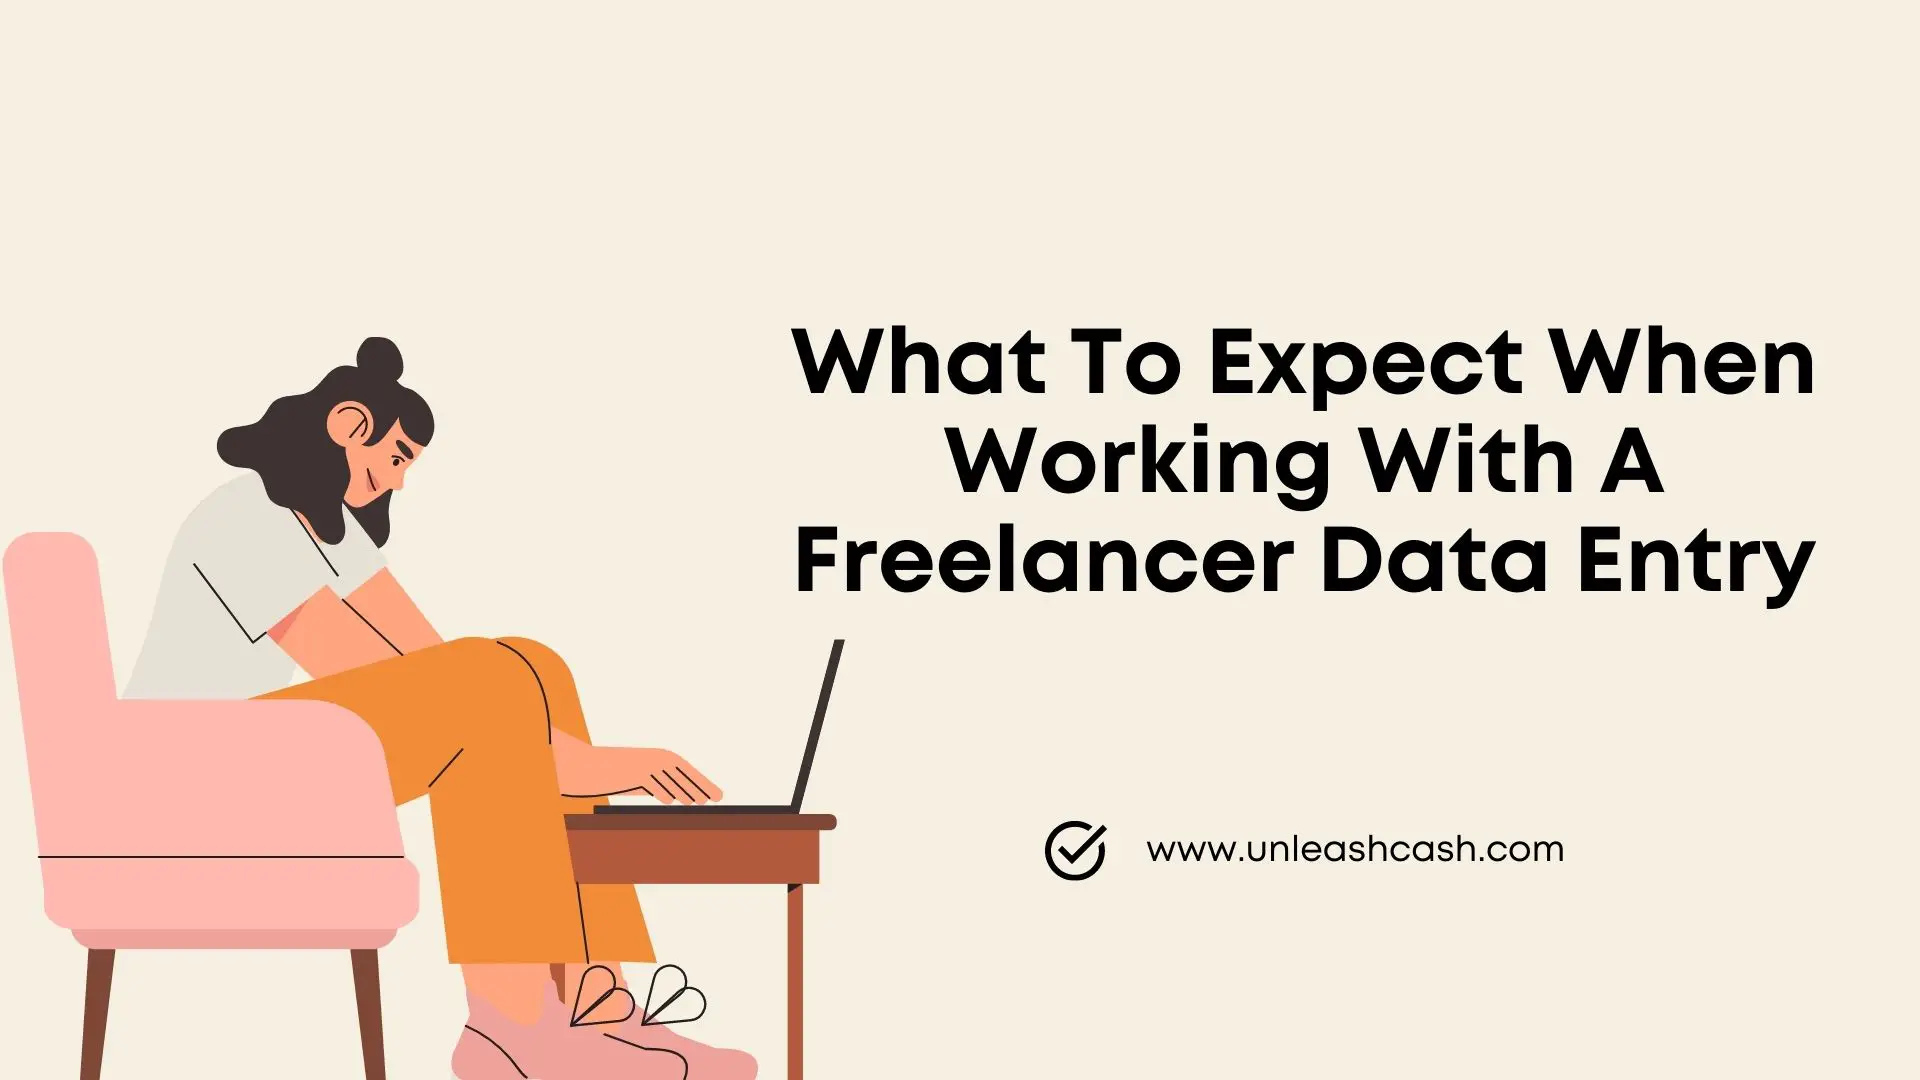 What To Expect When Working With A Freelancer Data Entry